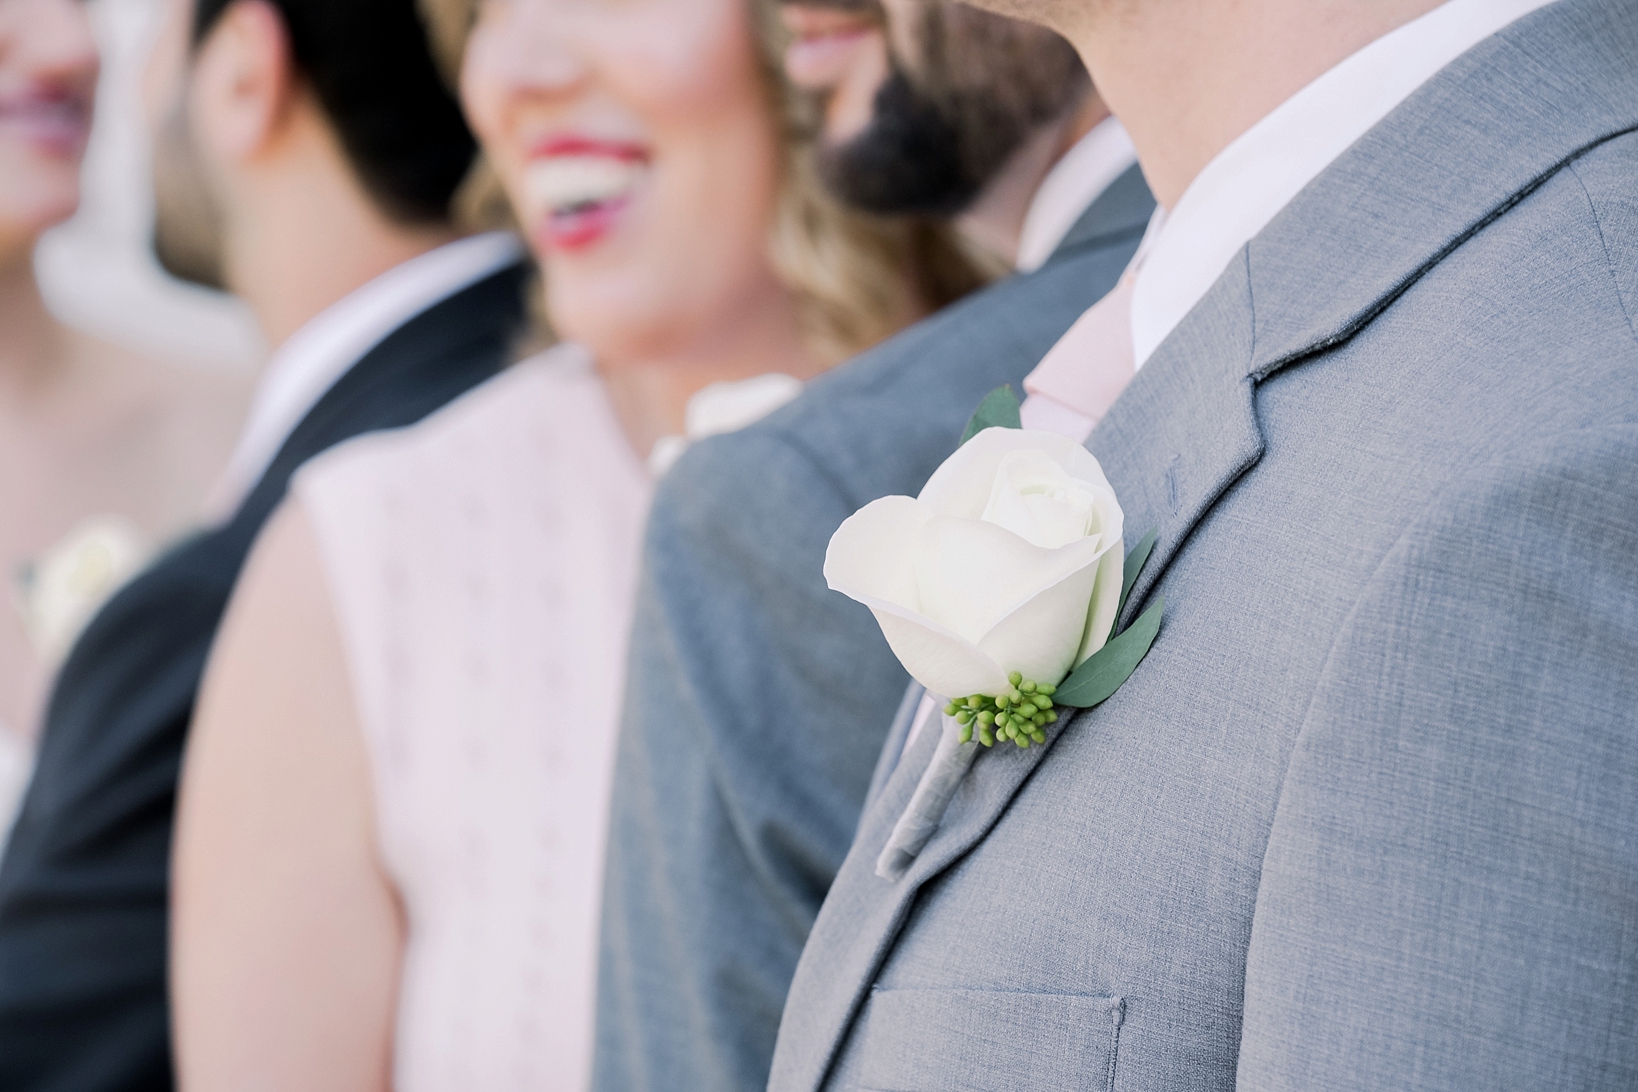 Detail shot of the Groomsmen's white floral boutonnière